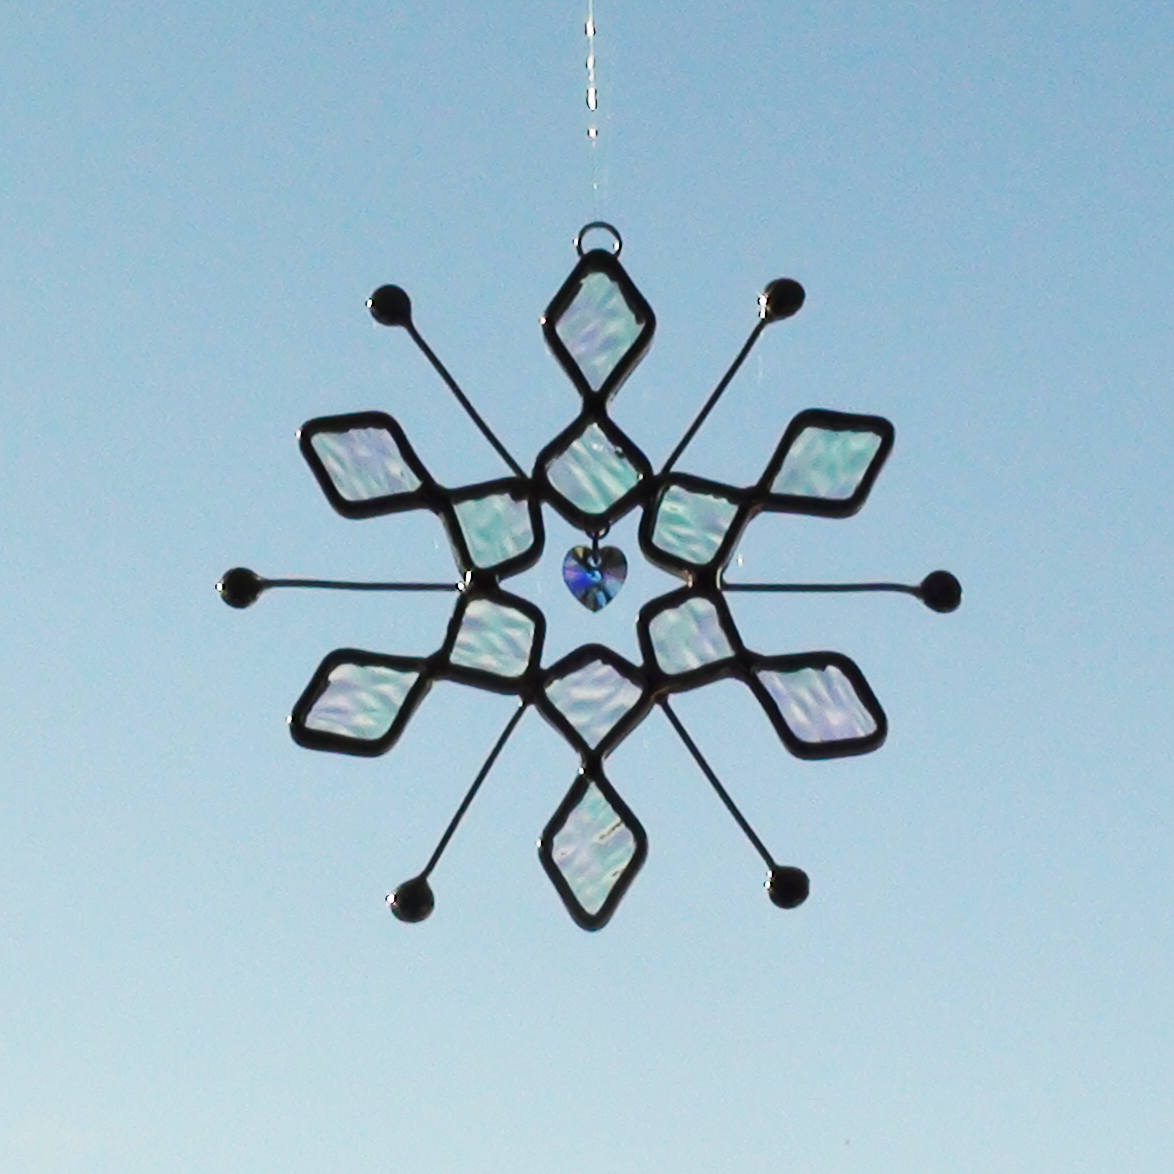 Suncatcher made of Iridescent Stained Glass Snowflake Design with Crystal Heart in Middle